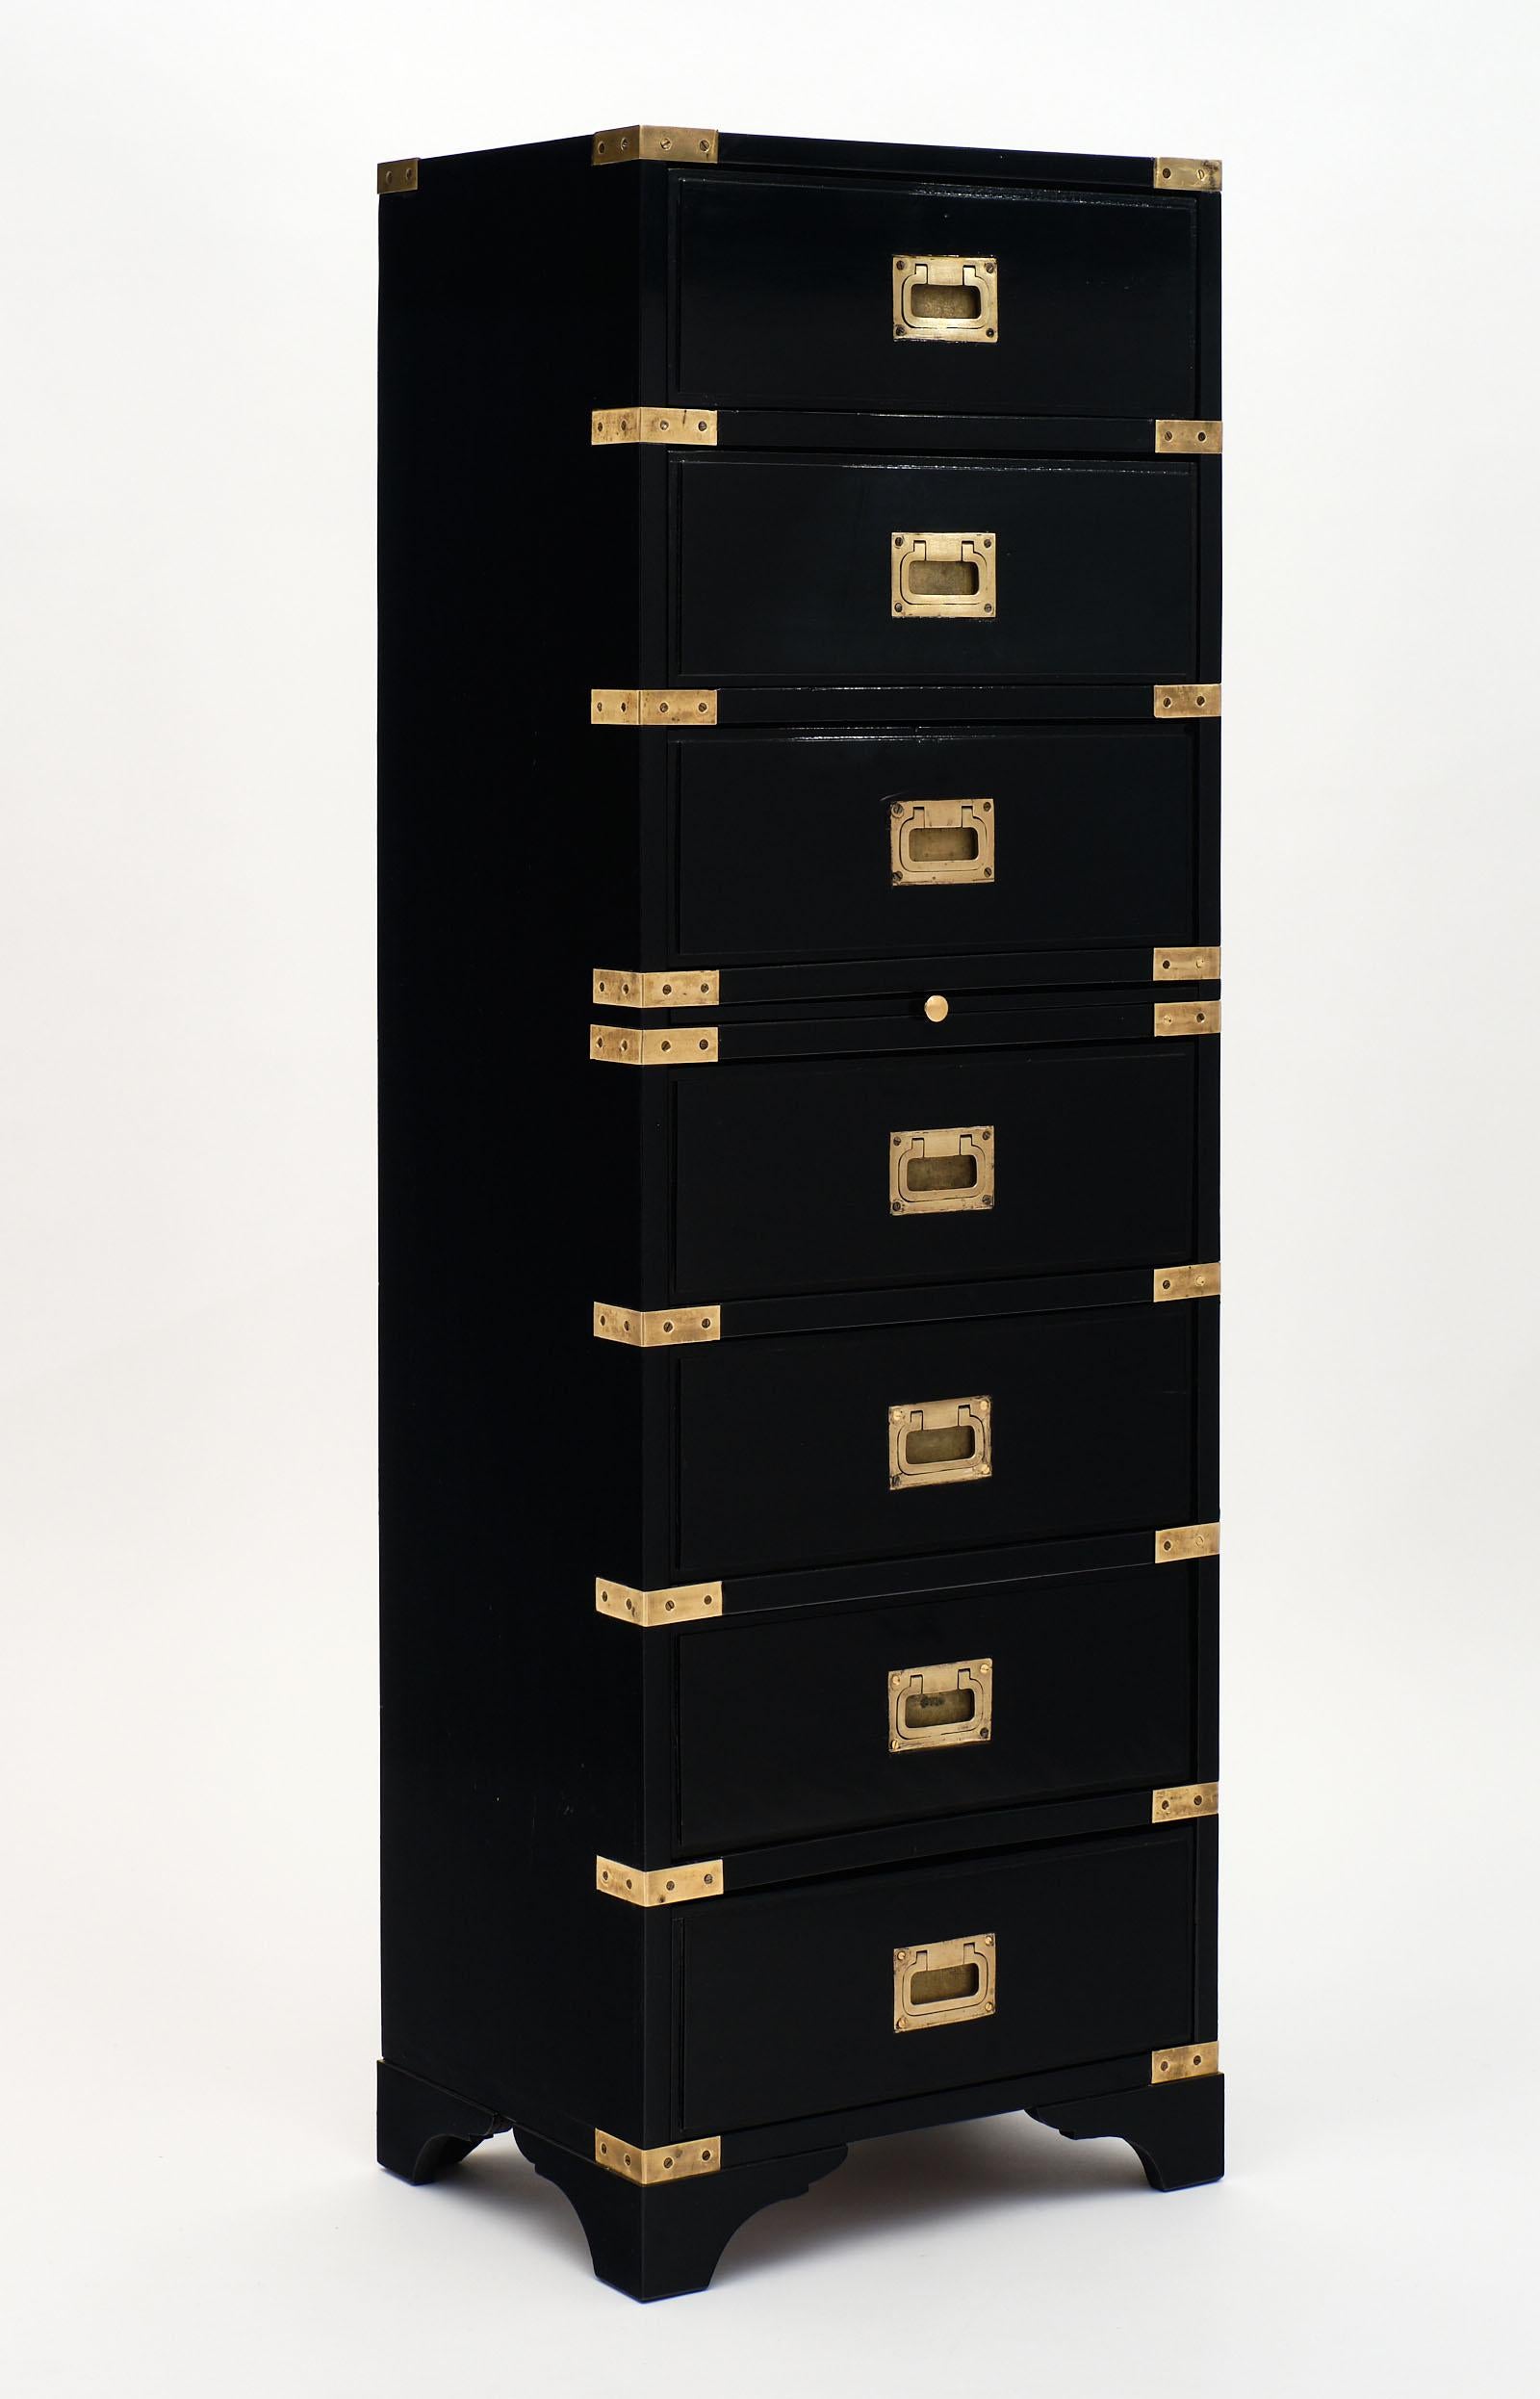 English Campaign style semainier made of cherrywood. This elegant cabinet features seven dovetailed drawers with original solid brass hardware and a writing pullout tablet. The piece has been finished with a lustrous ebony French polish.